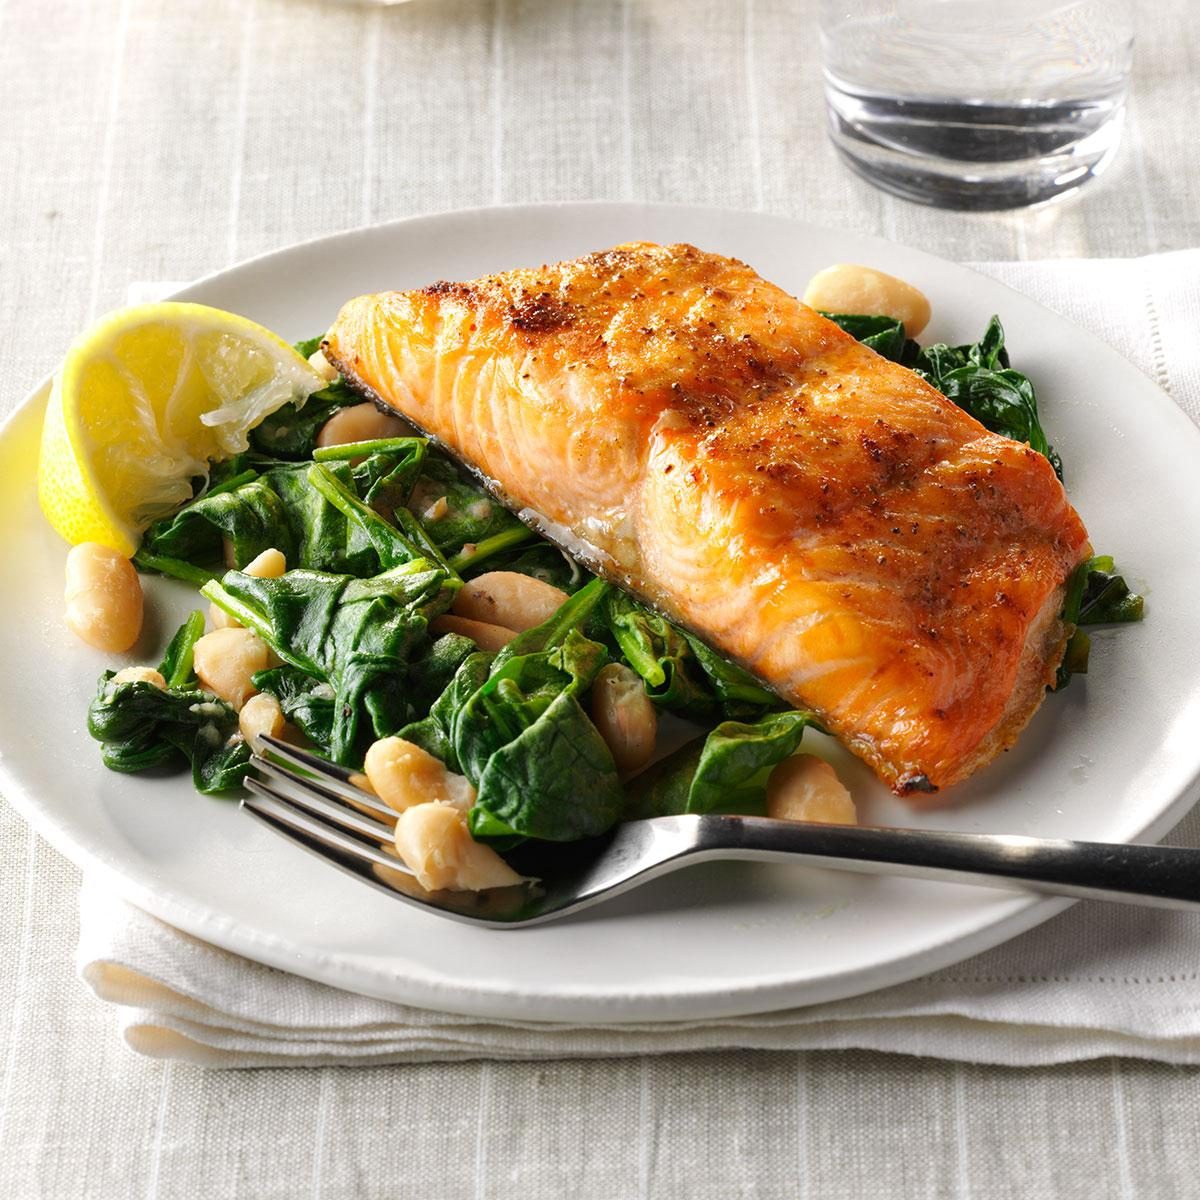 Broiled salmon with spinach and white beans.